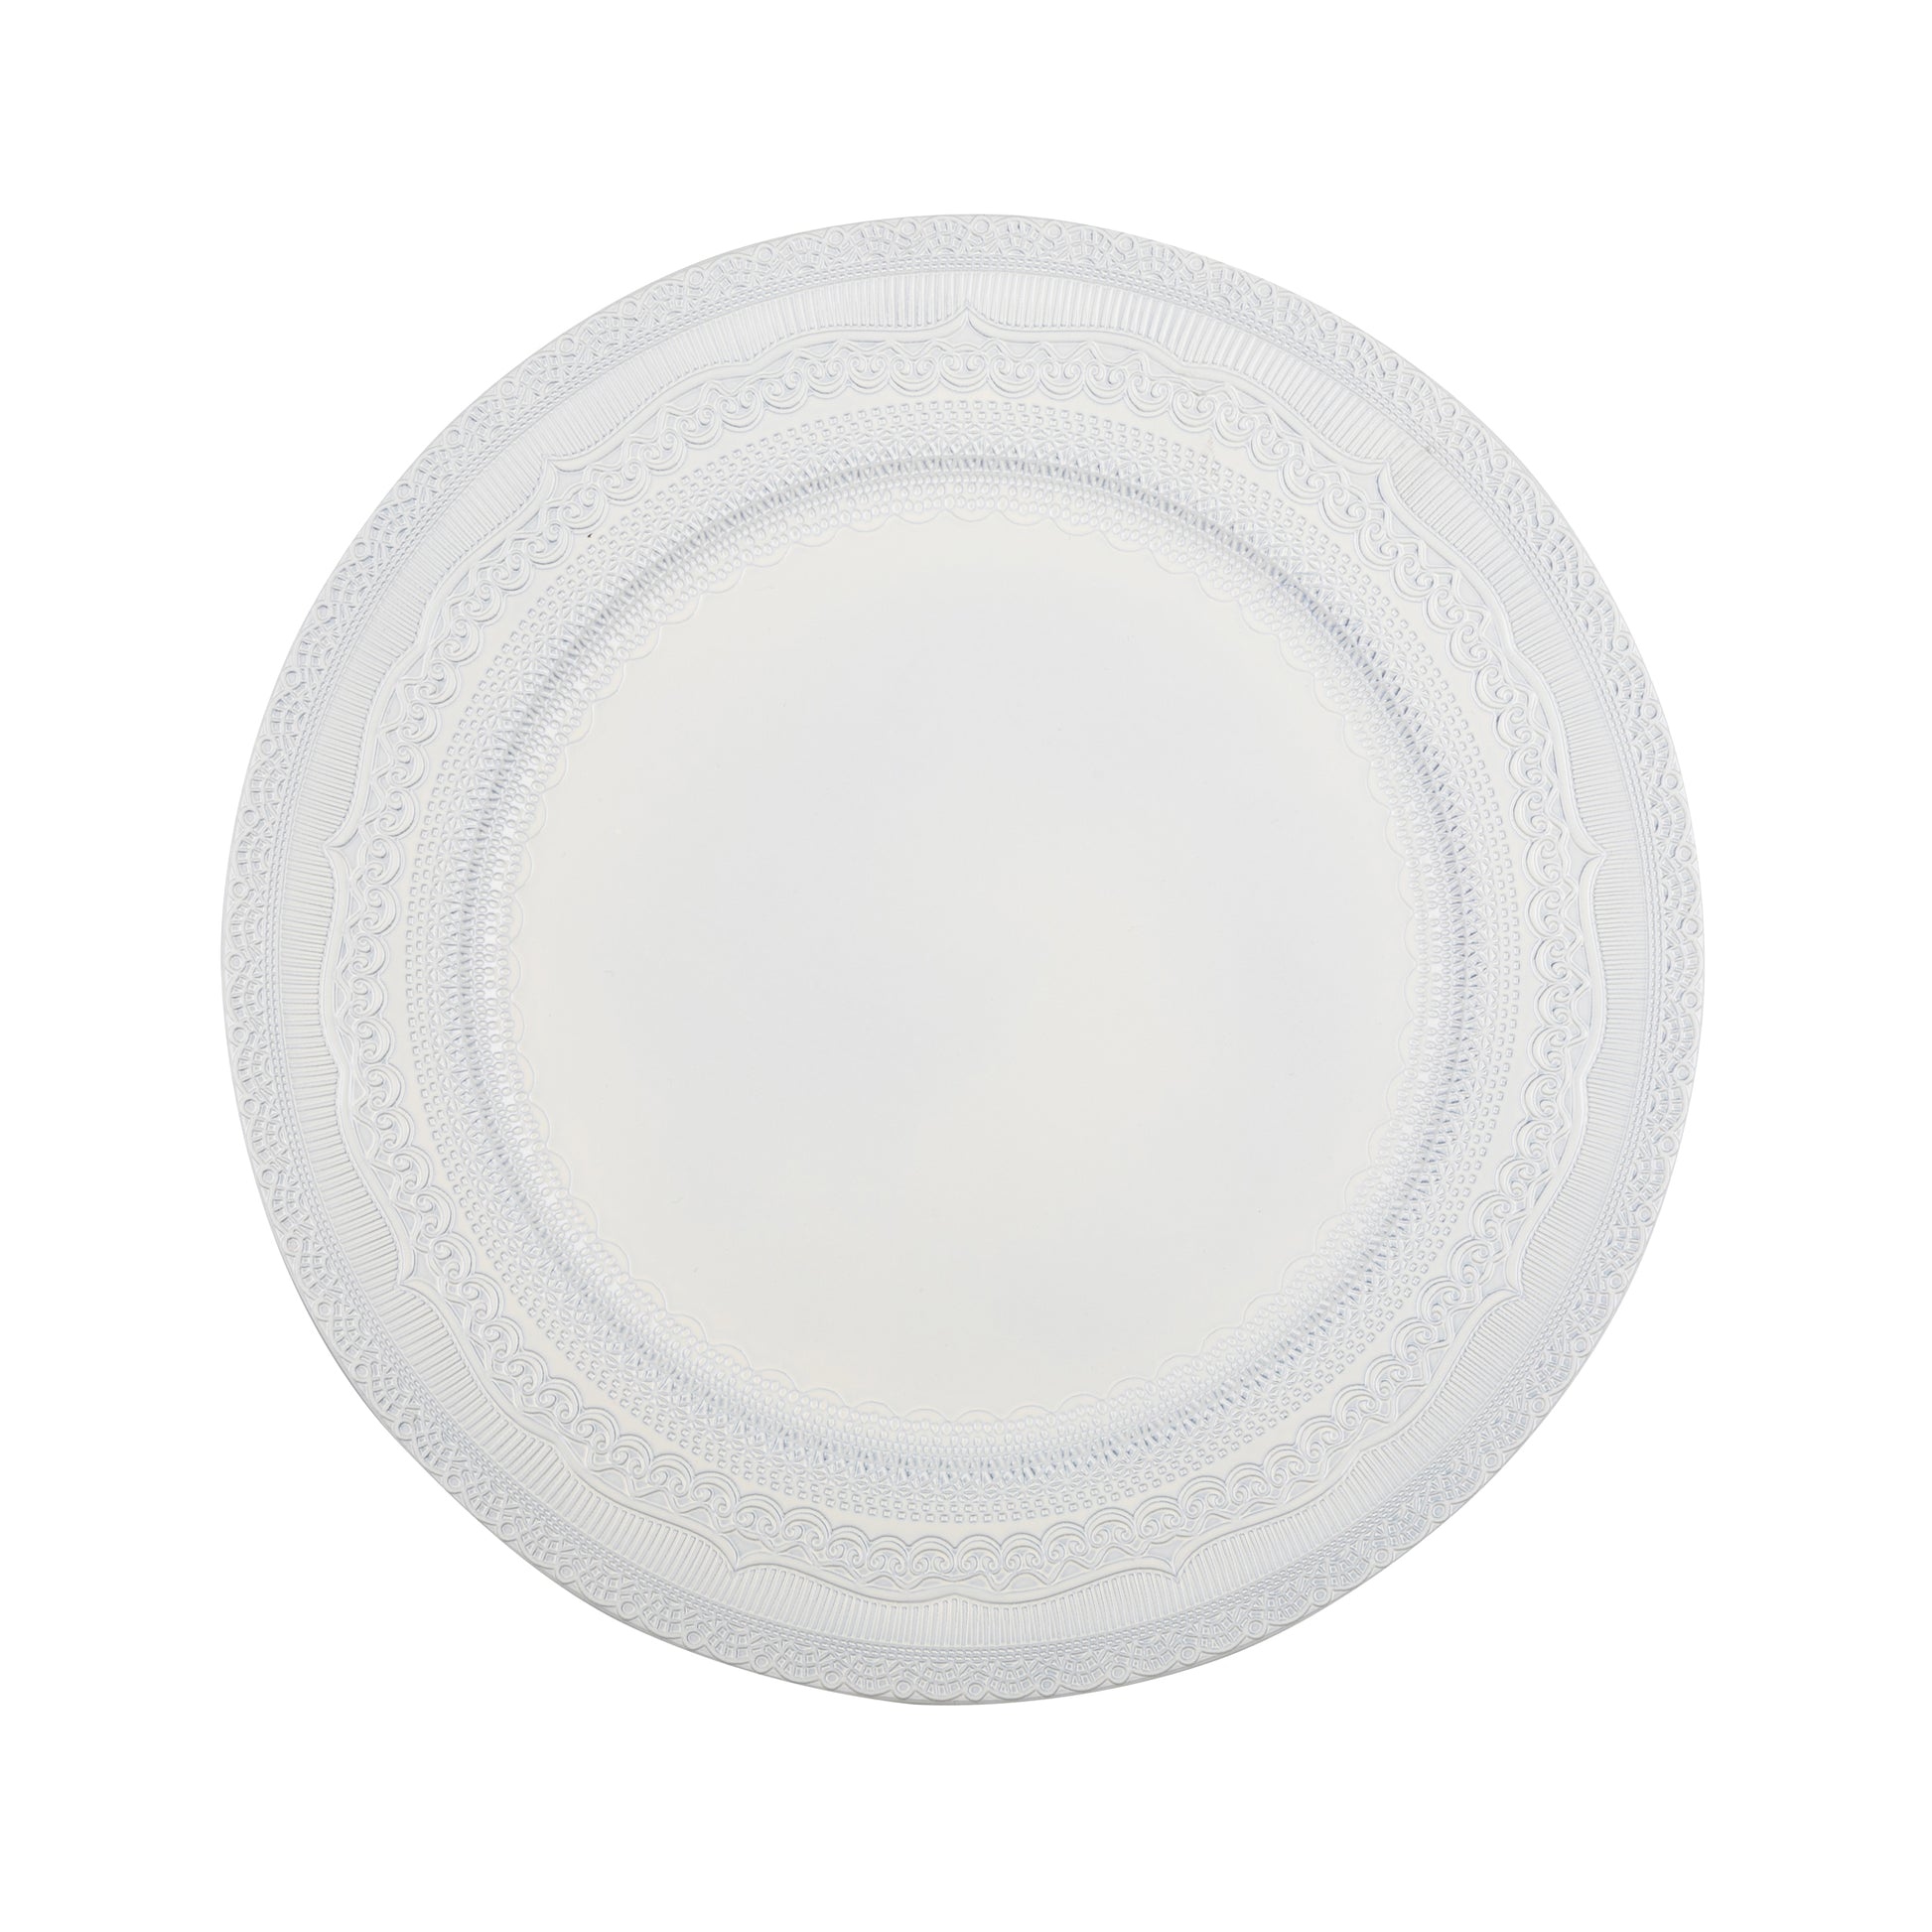 Lace Embossed Acrylic Plastic Charger Plate - Ivory